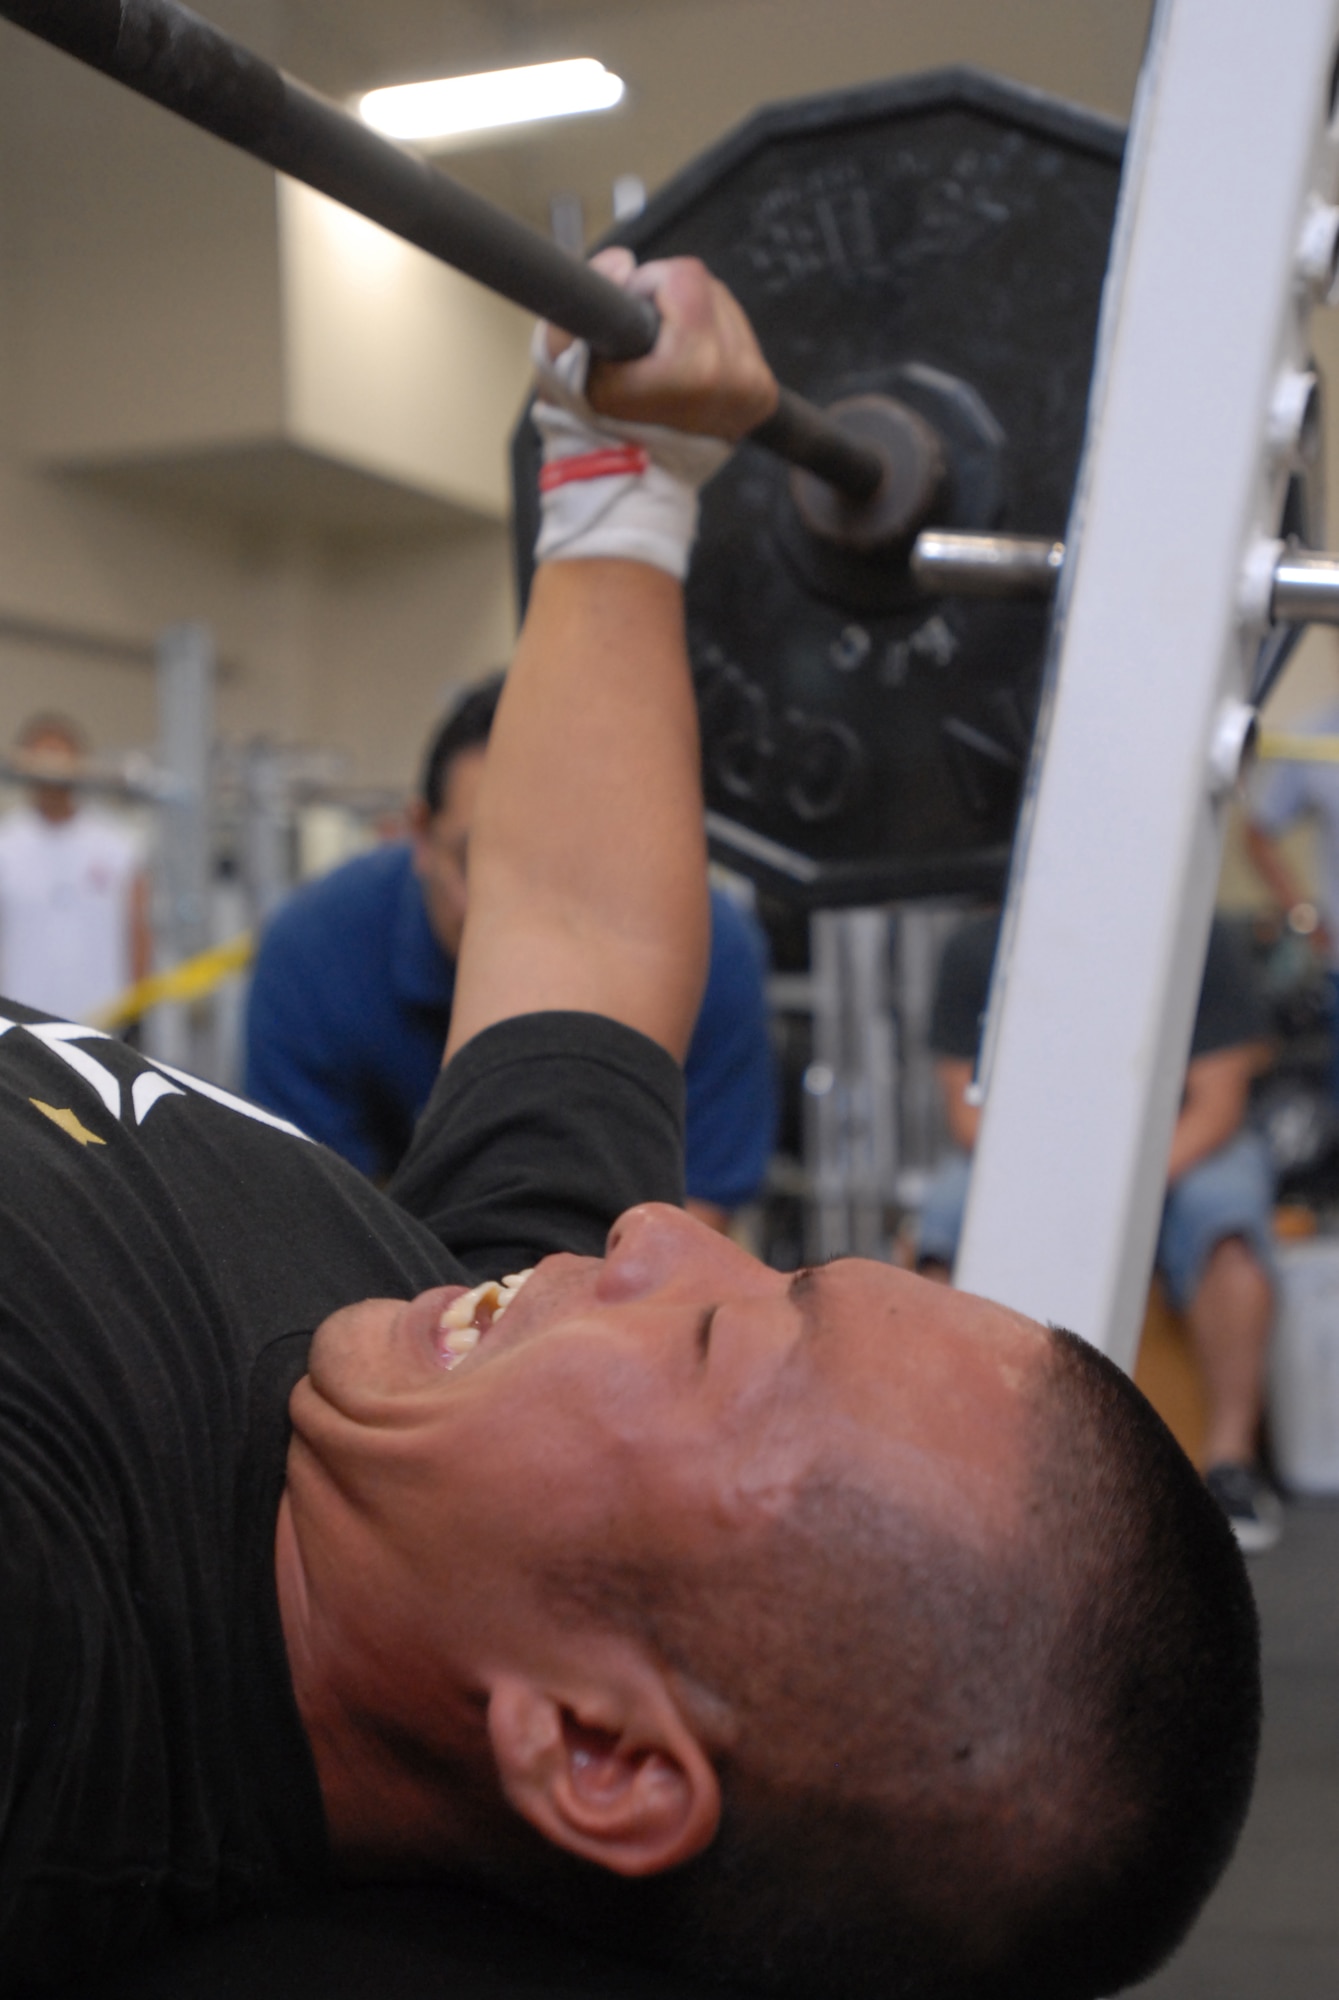 Hirota Kinashita attempts a lift during the bench press competition at the Risner Fitness Center May 10. Competitors bench-pressed for three rounds before entering a final round.
(U.S. Air Force/Staff Sgt. Darnell Cannady)